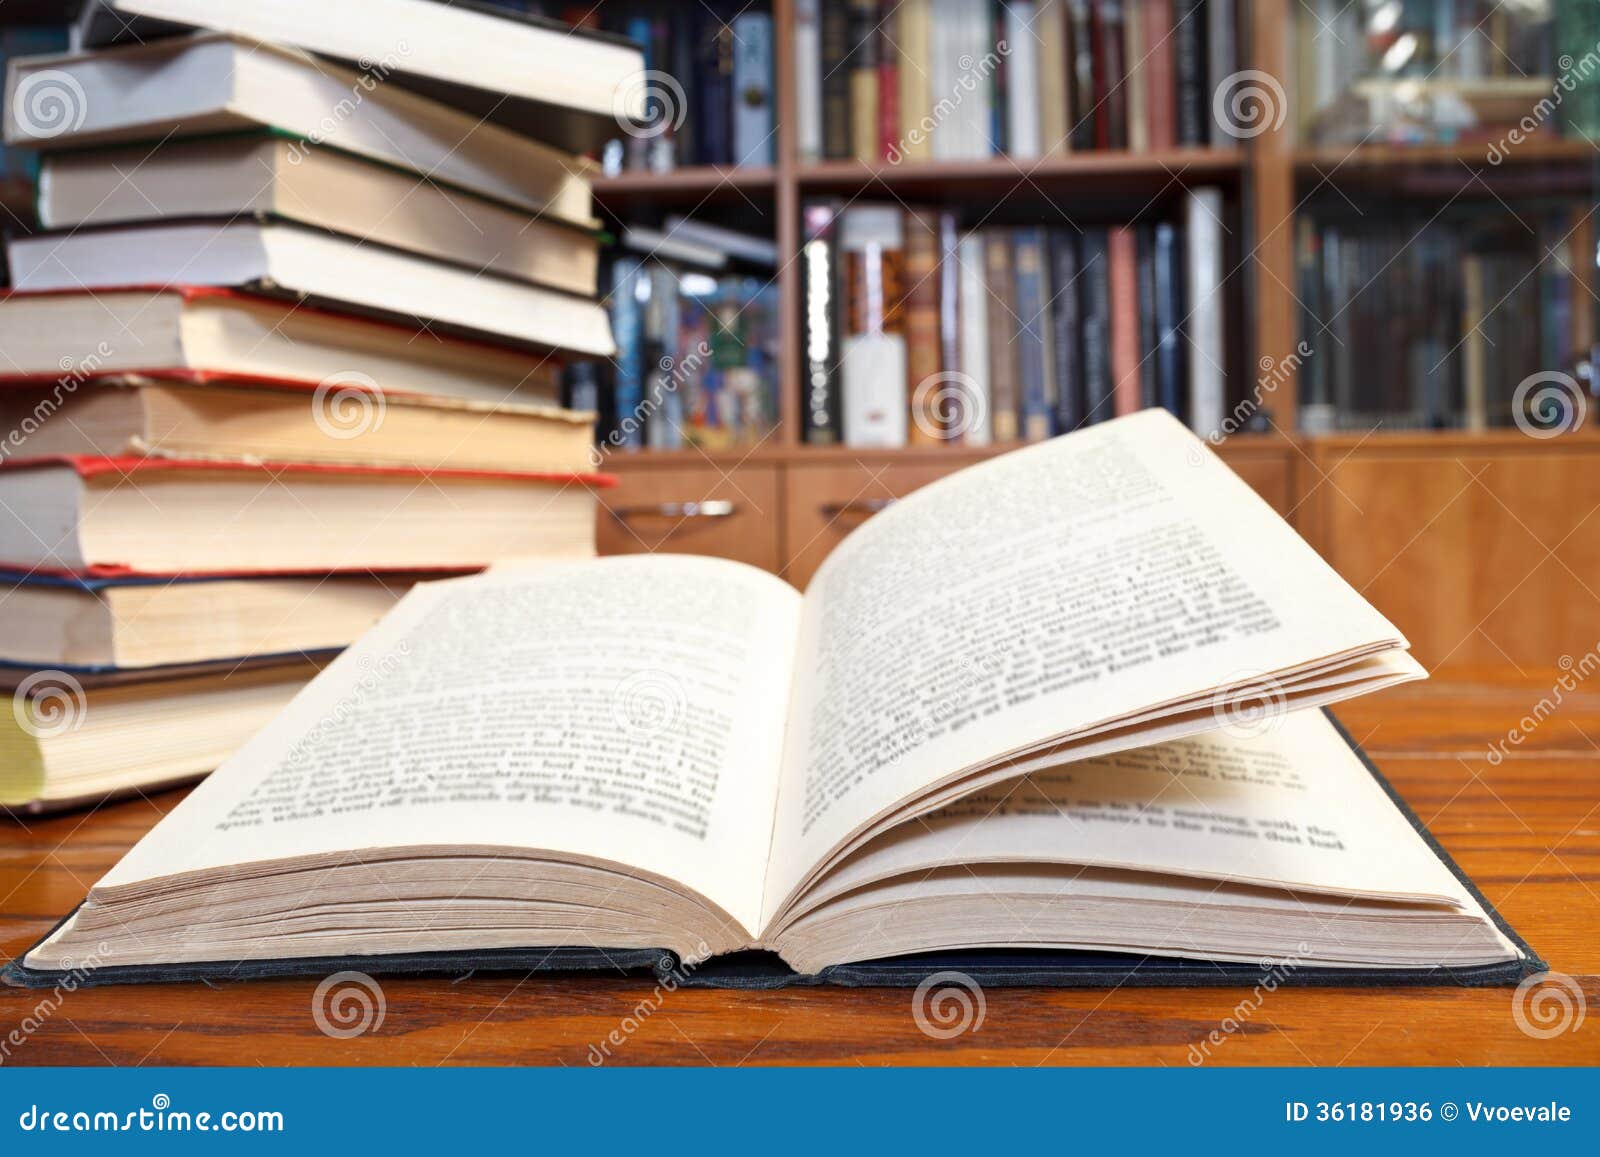 Open book on wooden table stock photo. Image of blur 